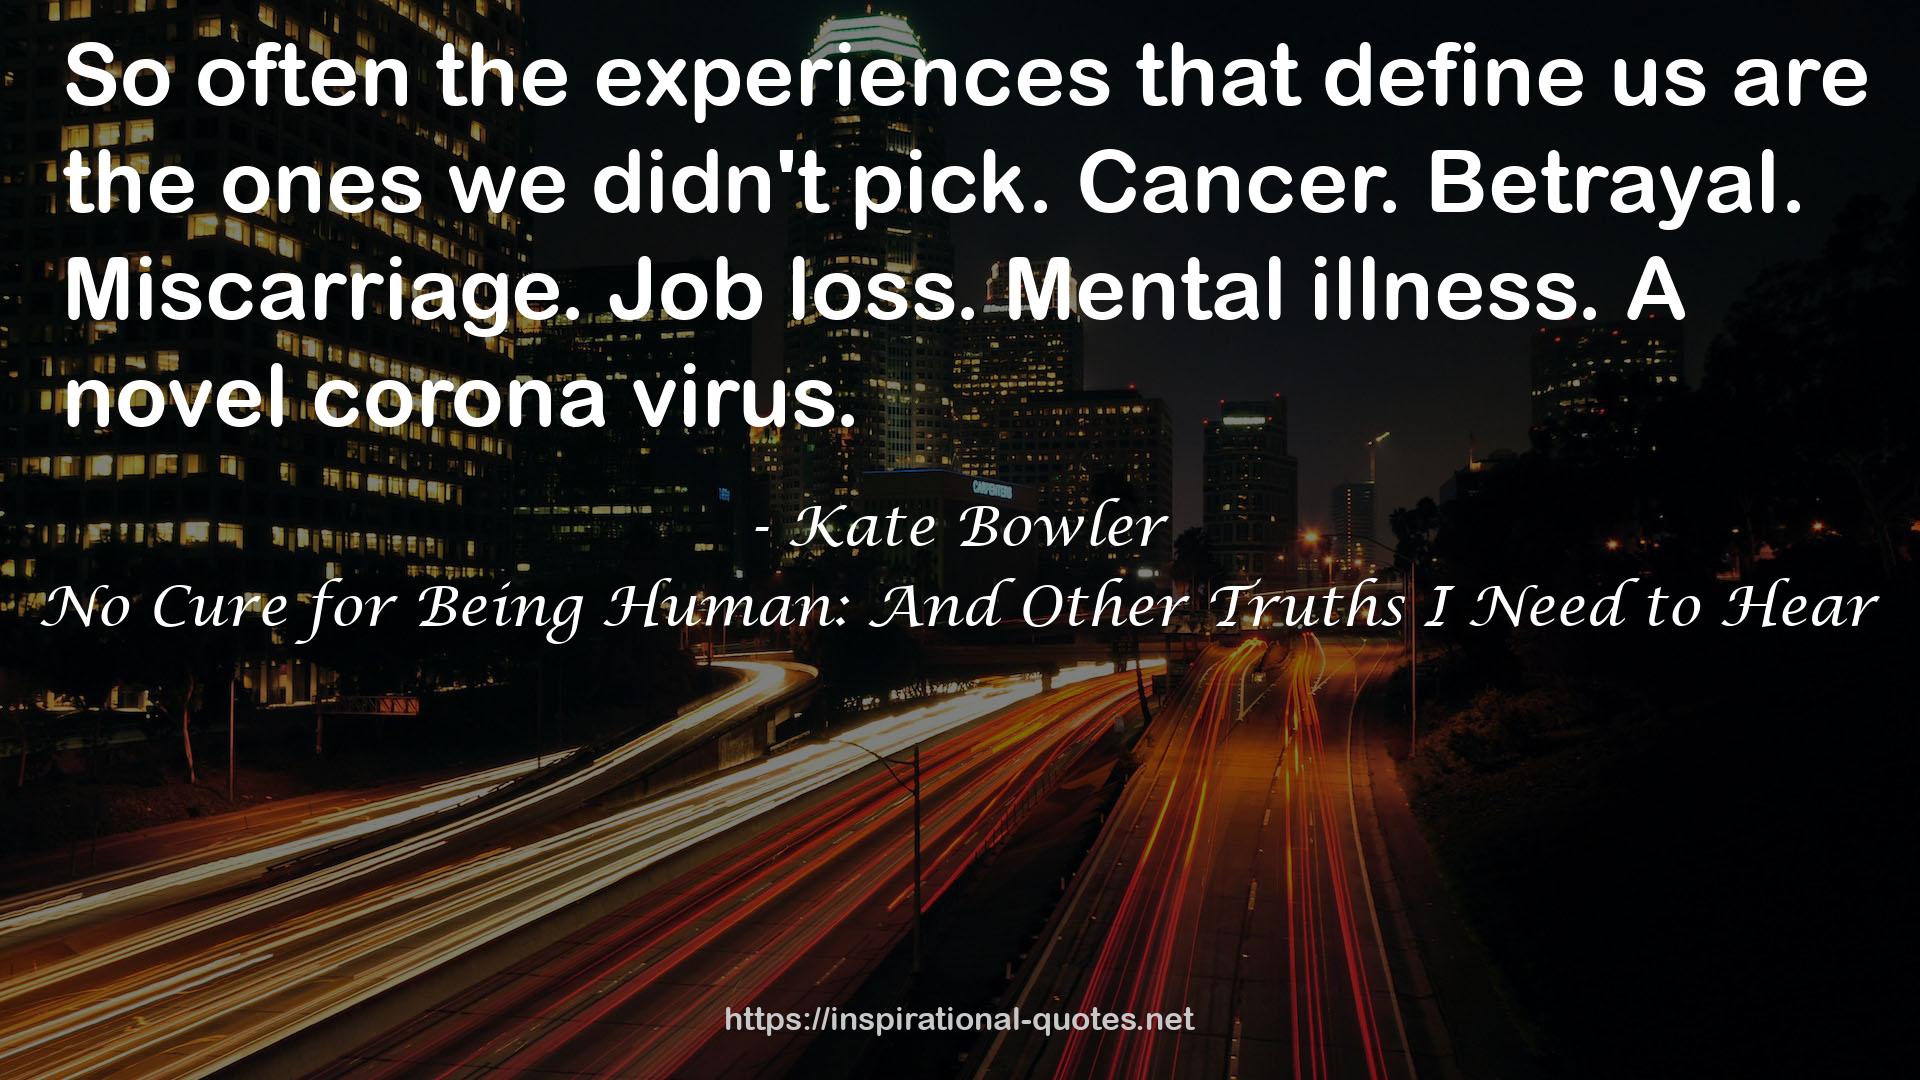 No Cure for Being Human: And Other Truths I Need to Hear QUOTES